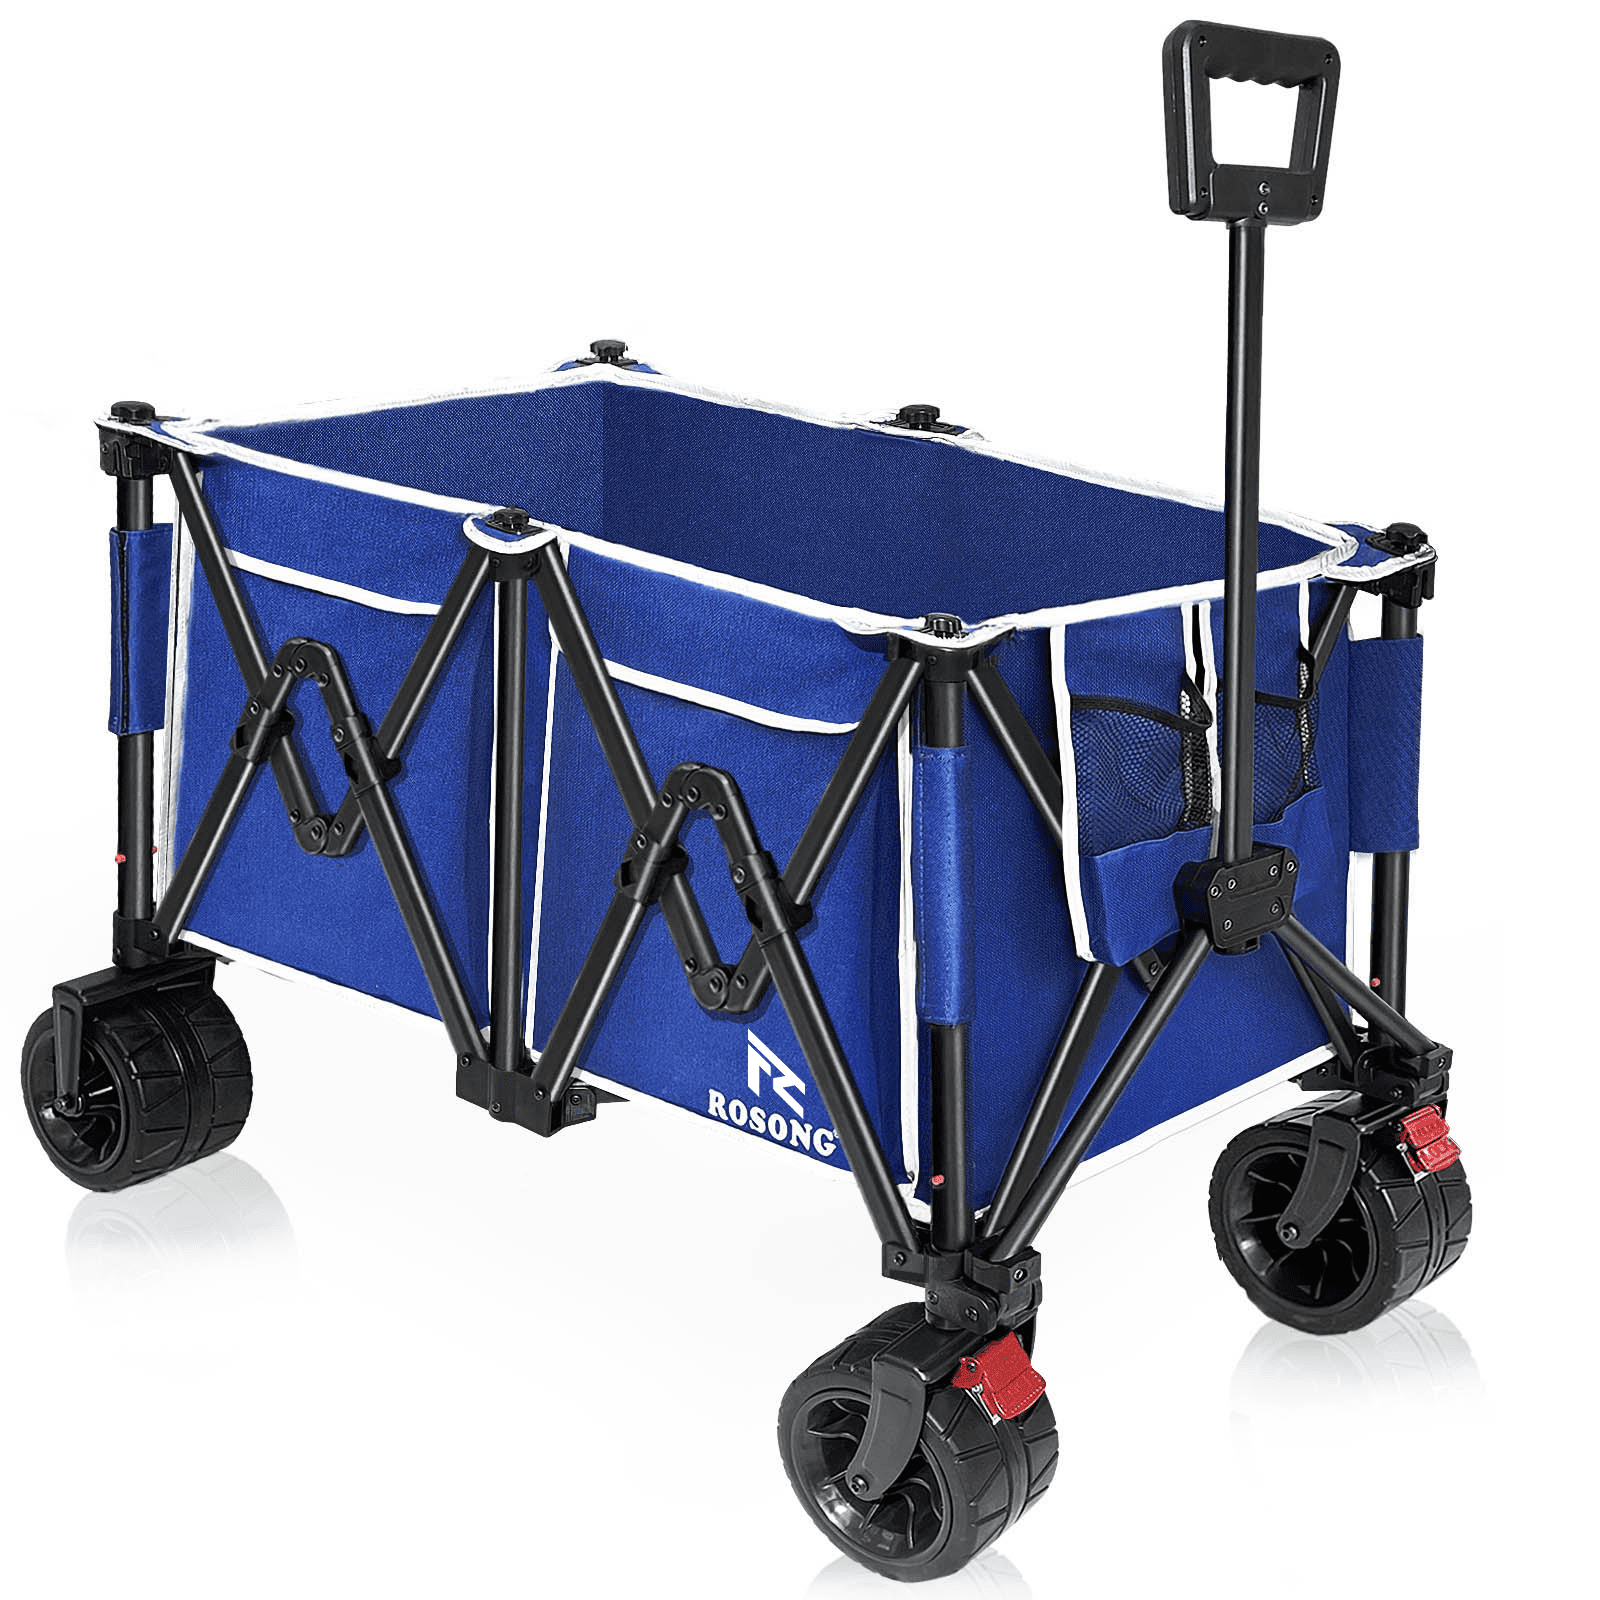 ROSONG Folding Wagon Cart for Beach Heavy Duty Collapsible 500 lbs with Big  Wheels All Terrain Foldable for Groceries Sand Garden Blue